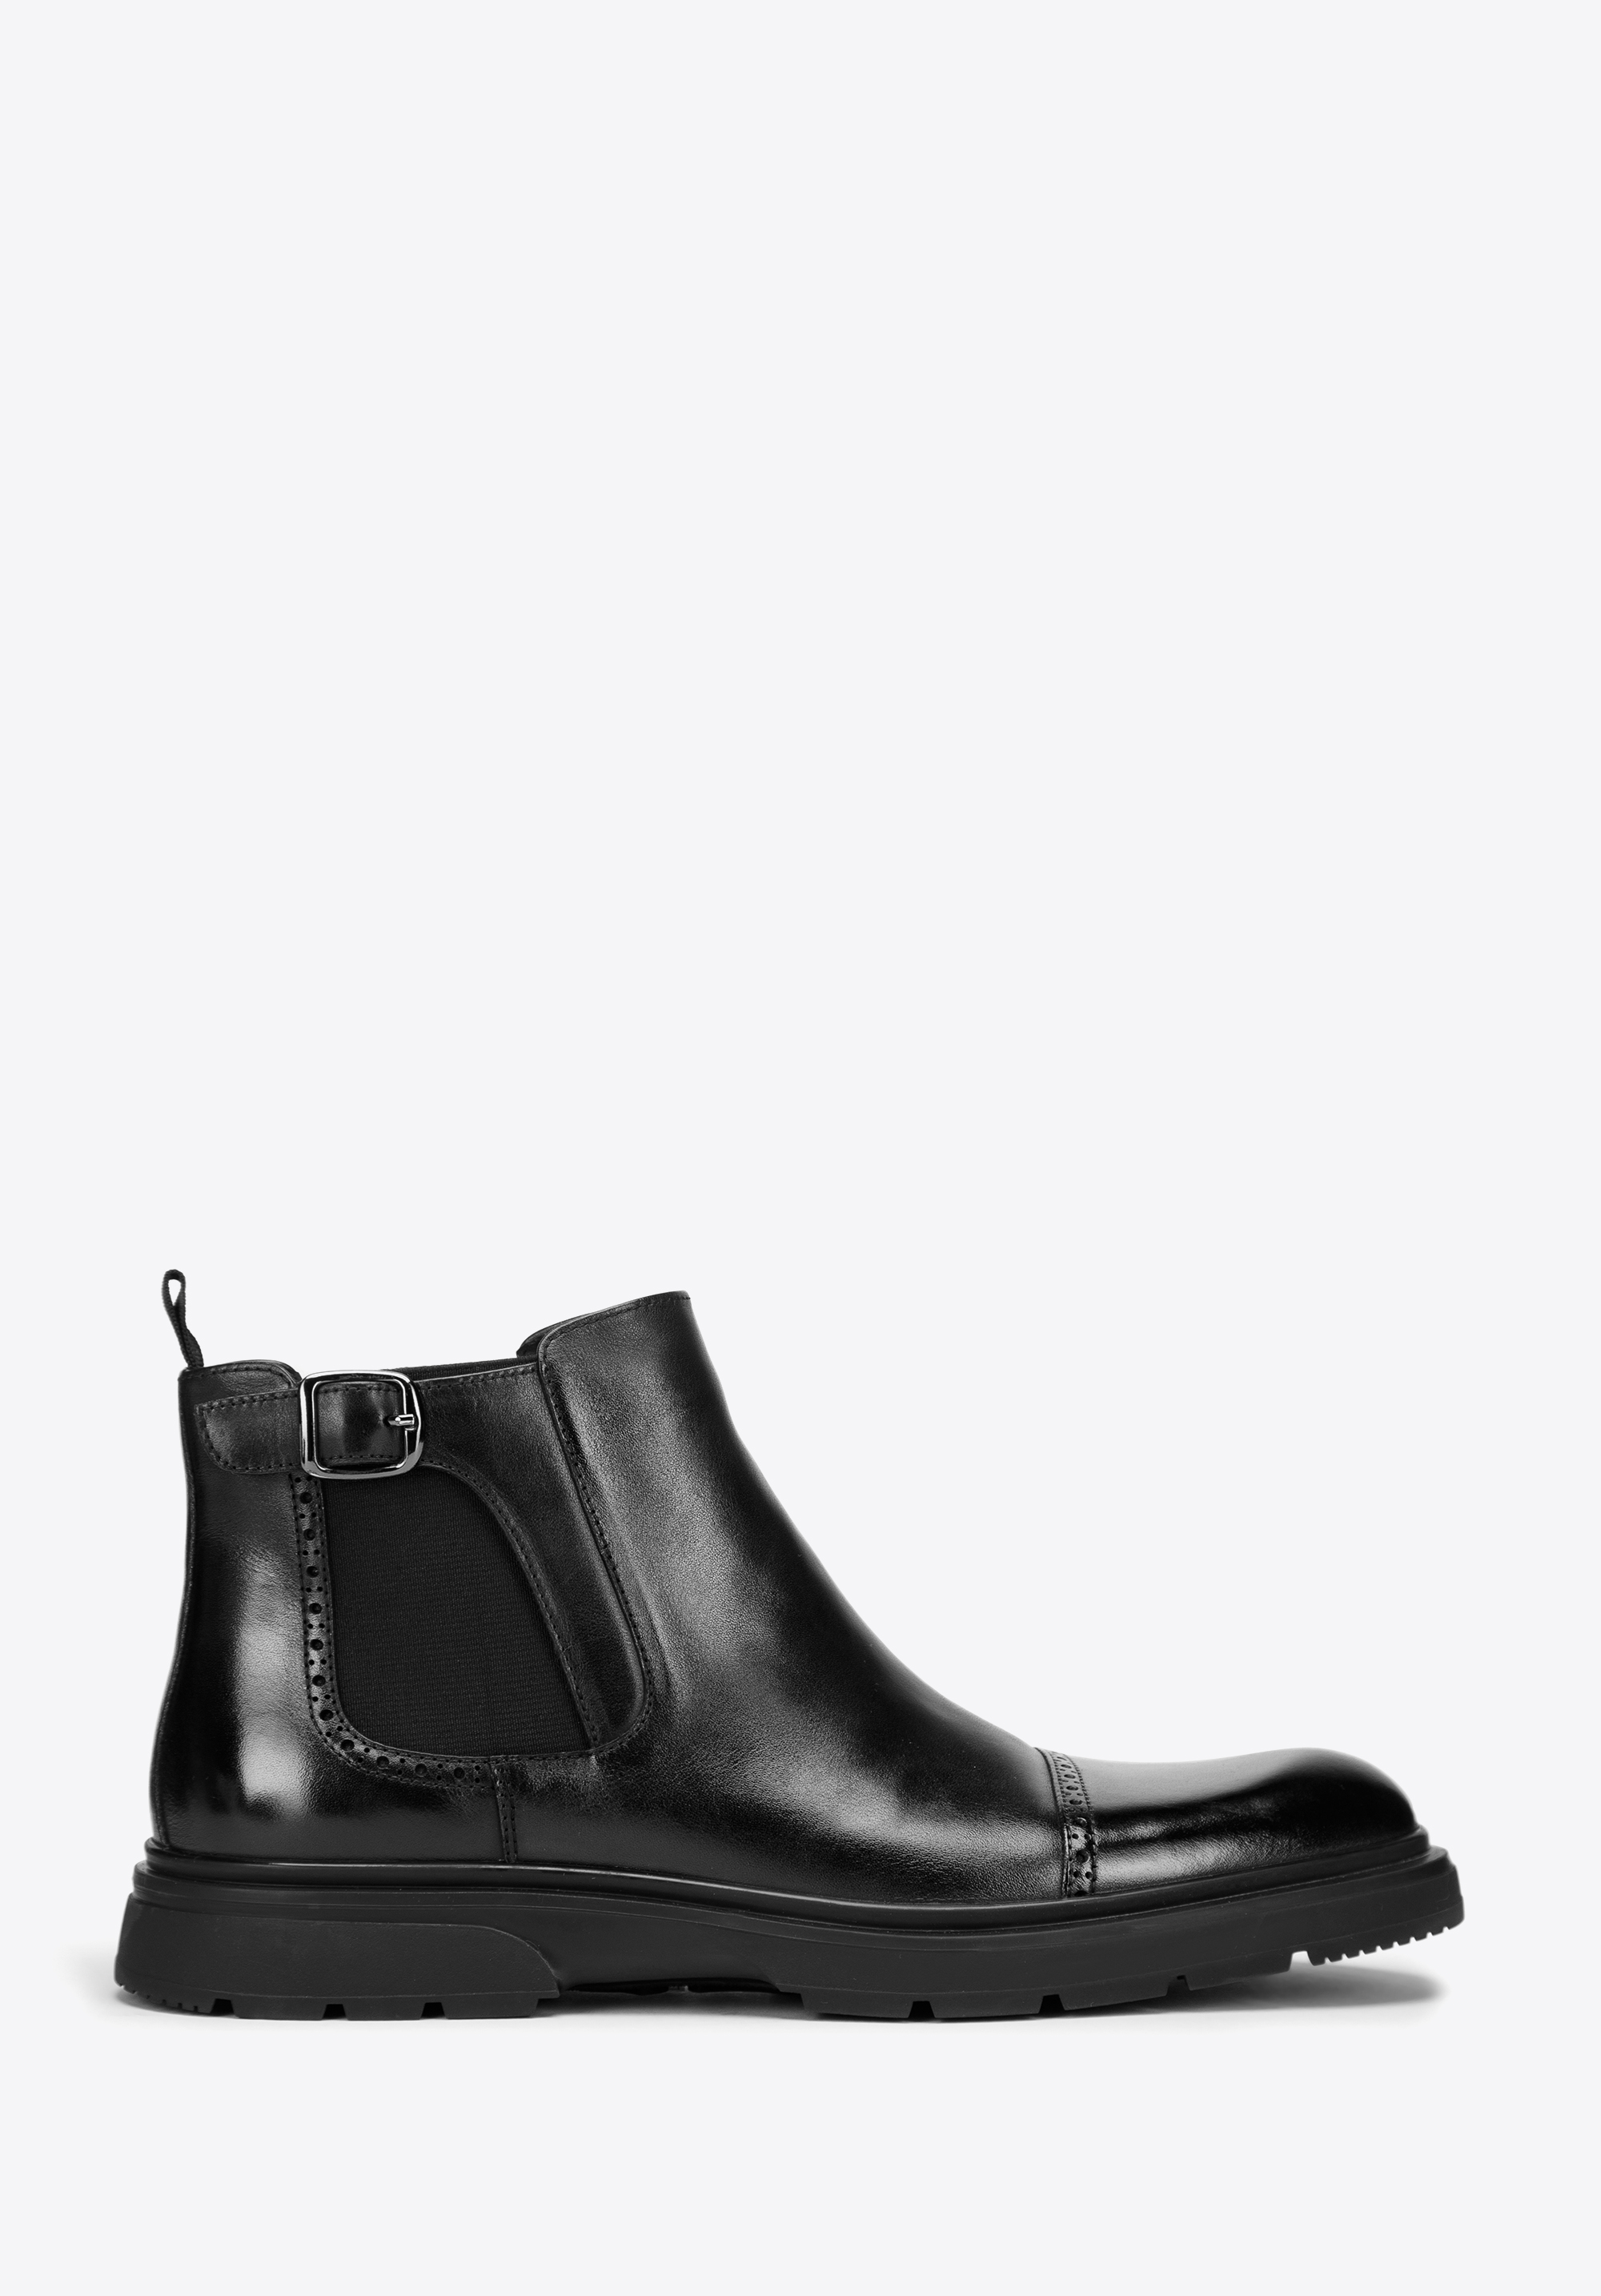 Men's leather Chelsea ankle boots